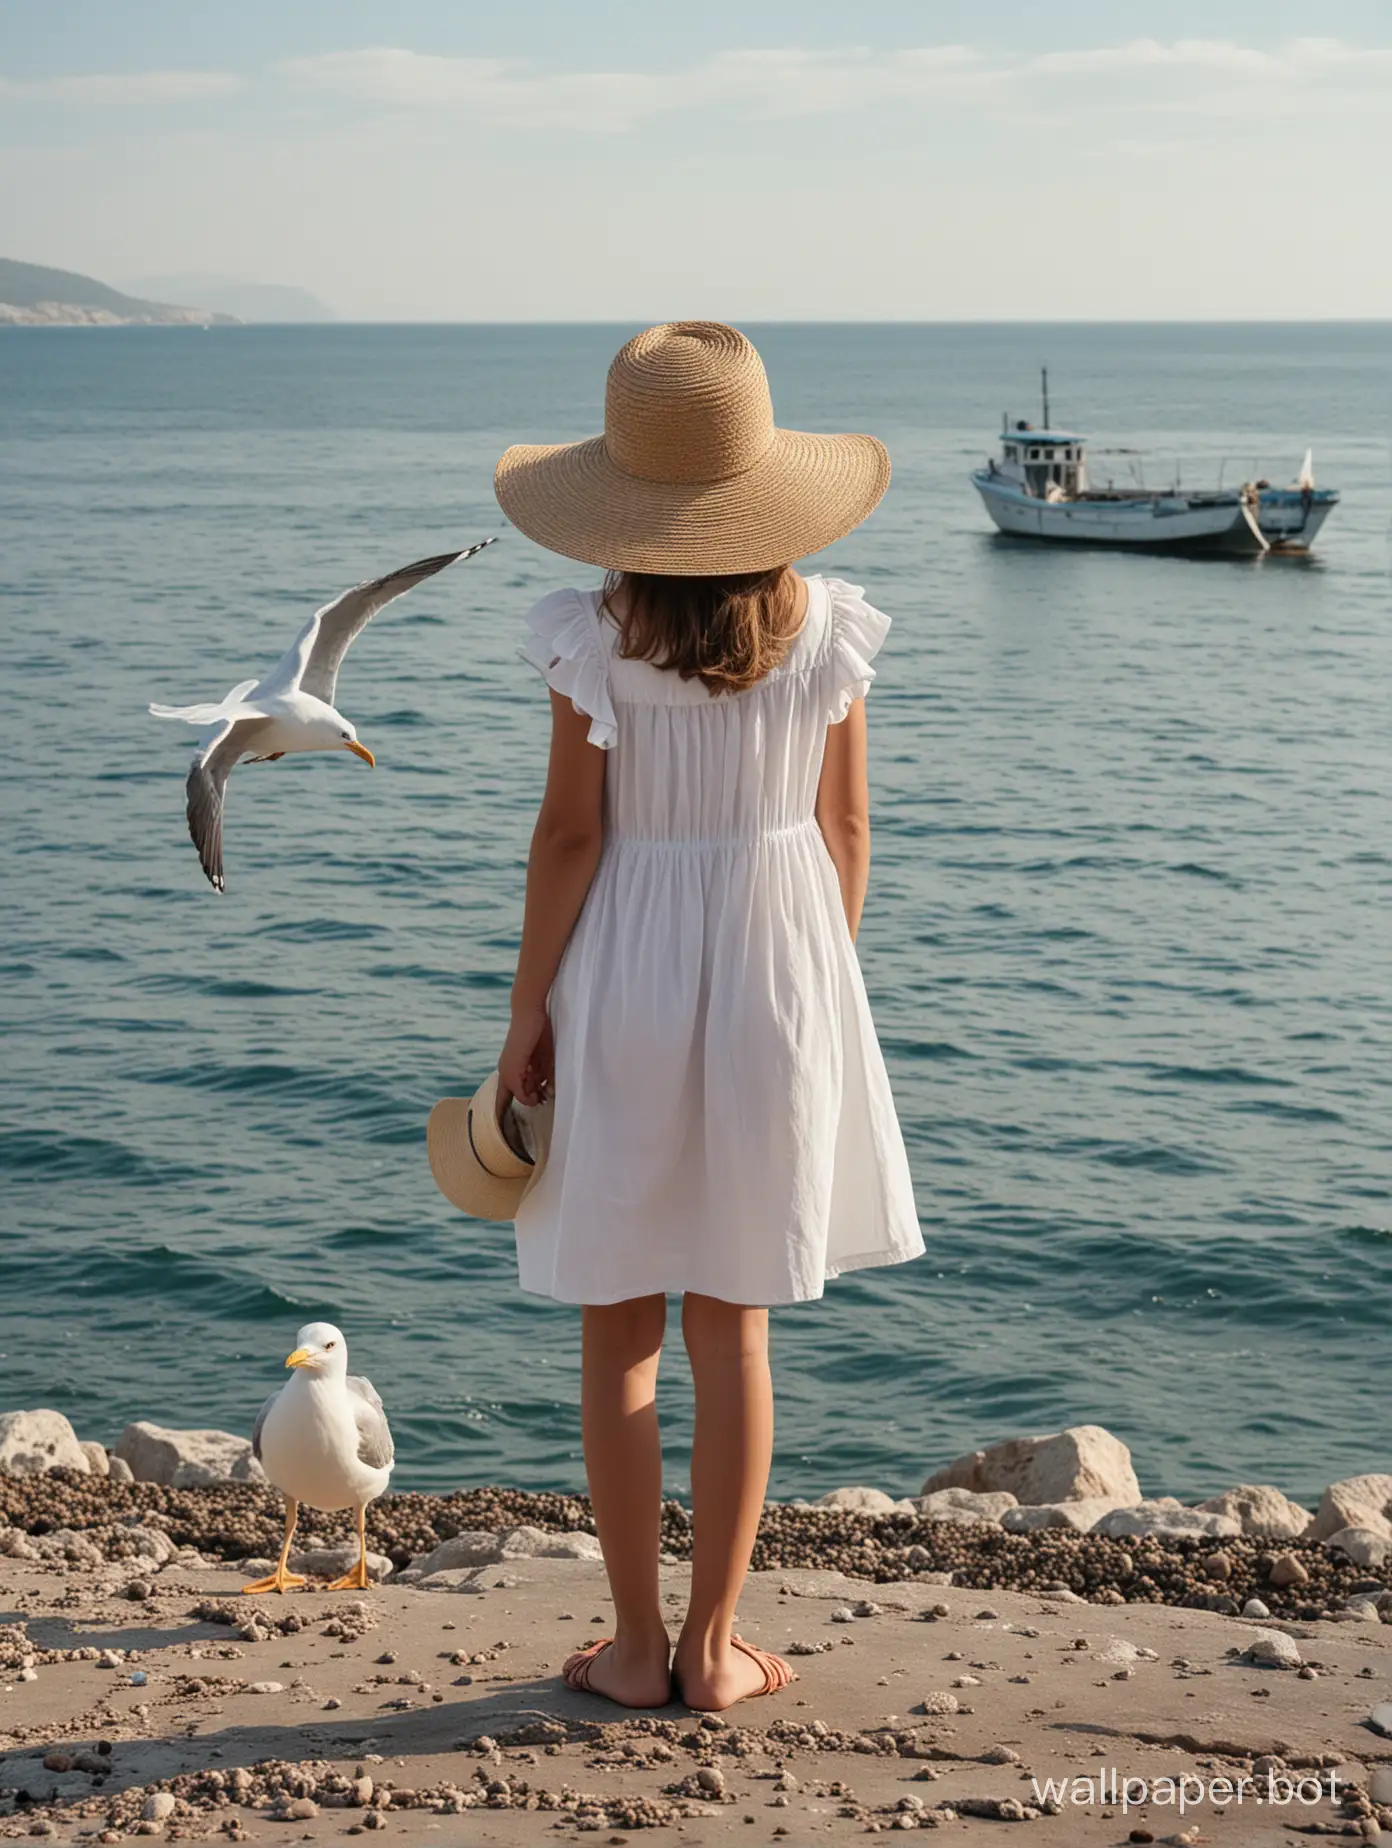 Girl-in-Summer-Dress-by-Black-Sea-Shore-with-Distant-Ship-and-Seagull